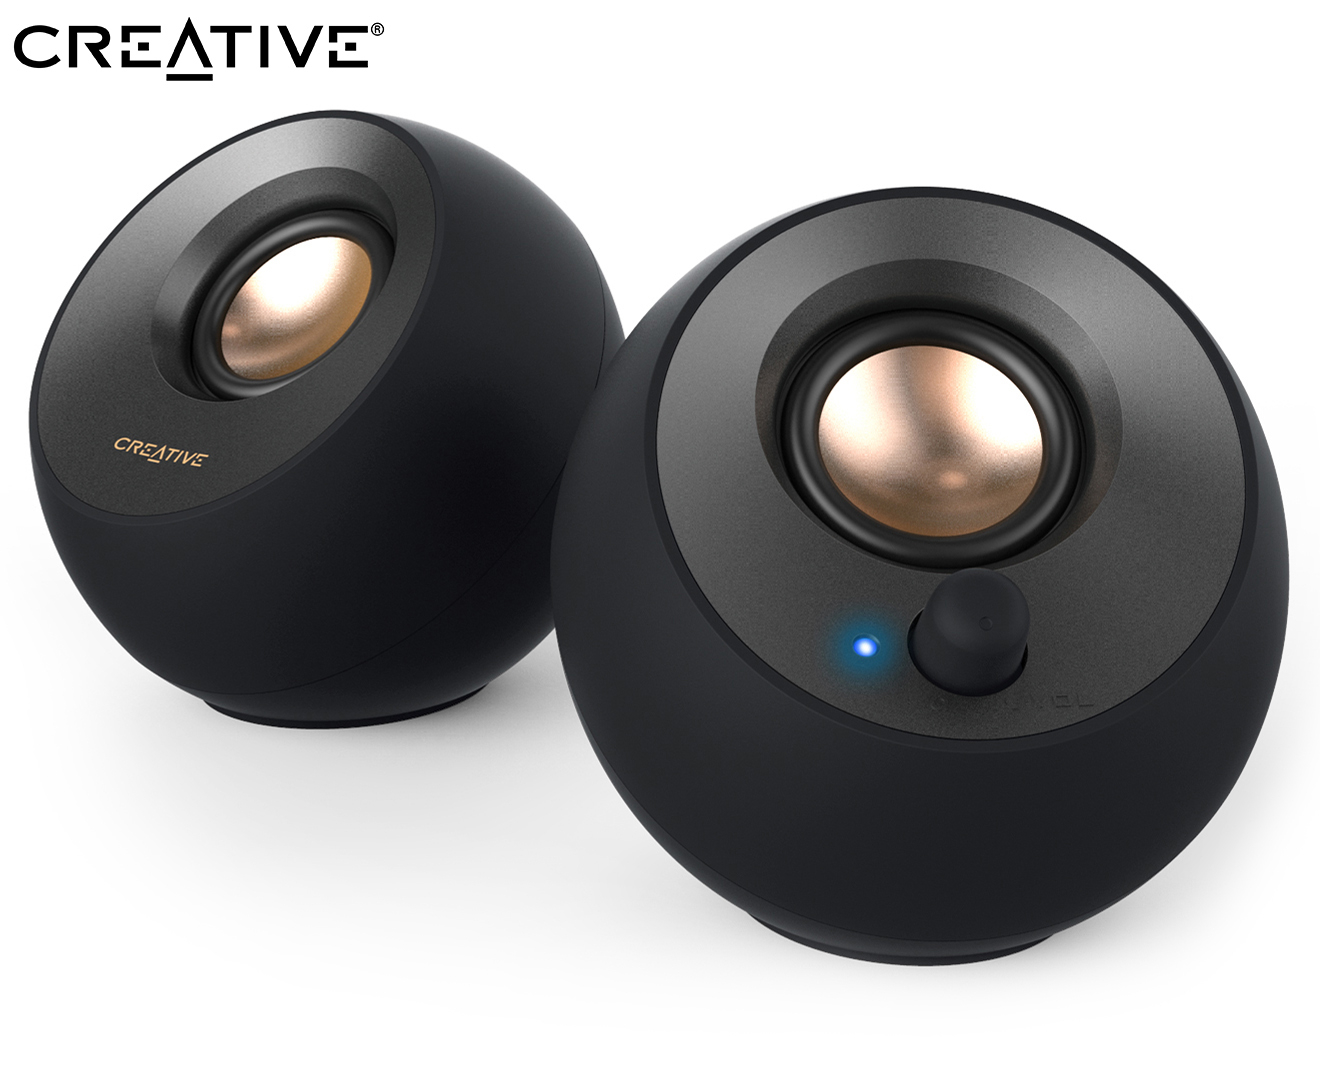 Creative Pebble Pro Review - Great All Rounder